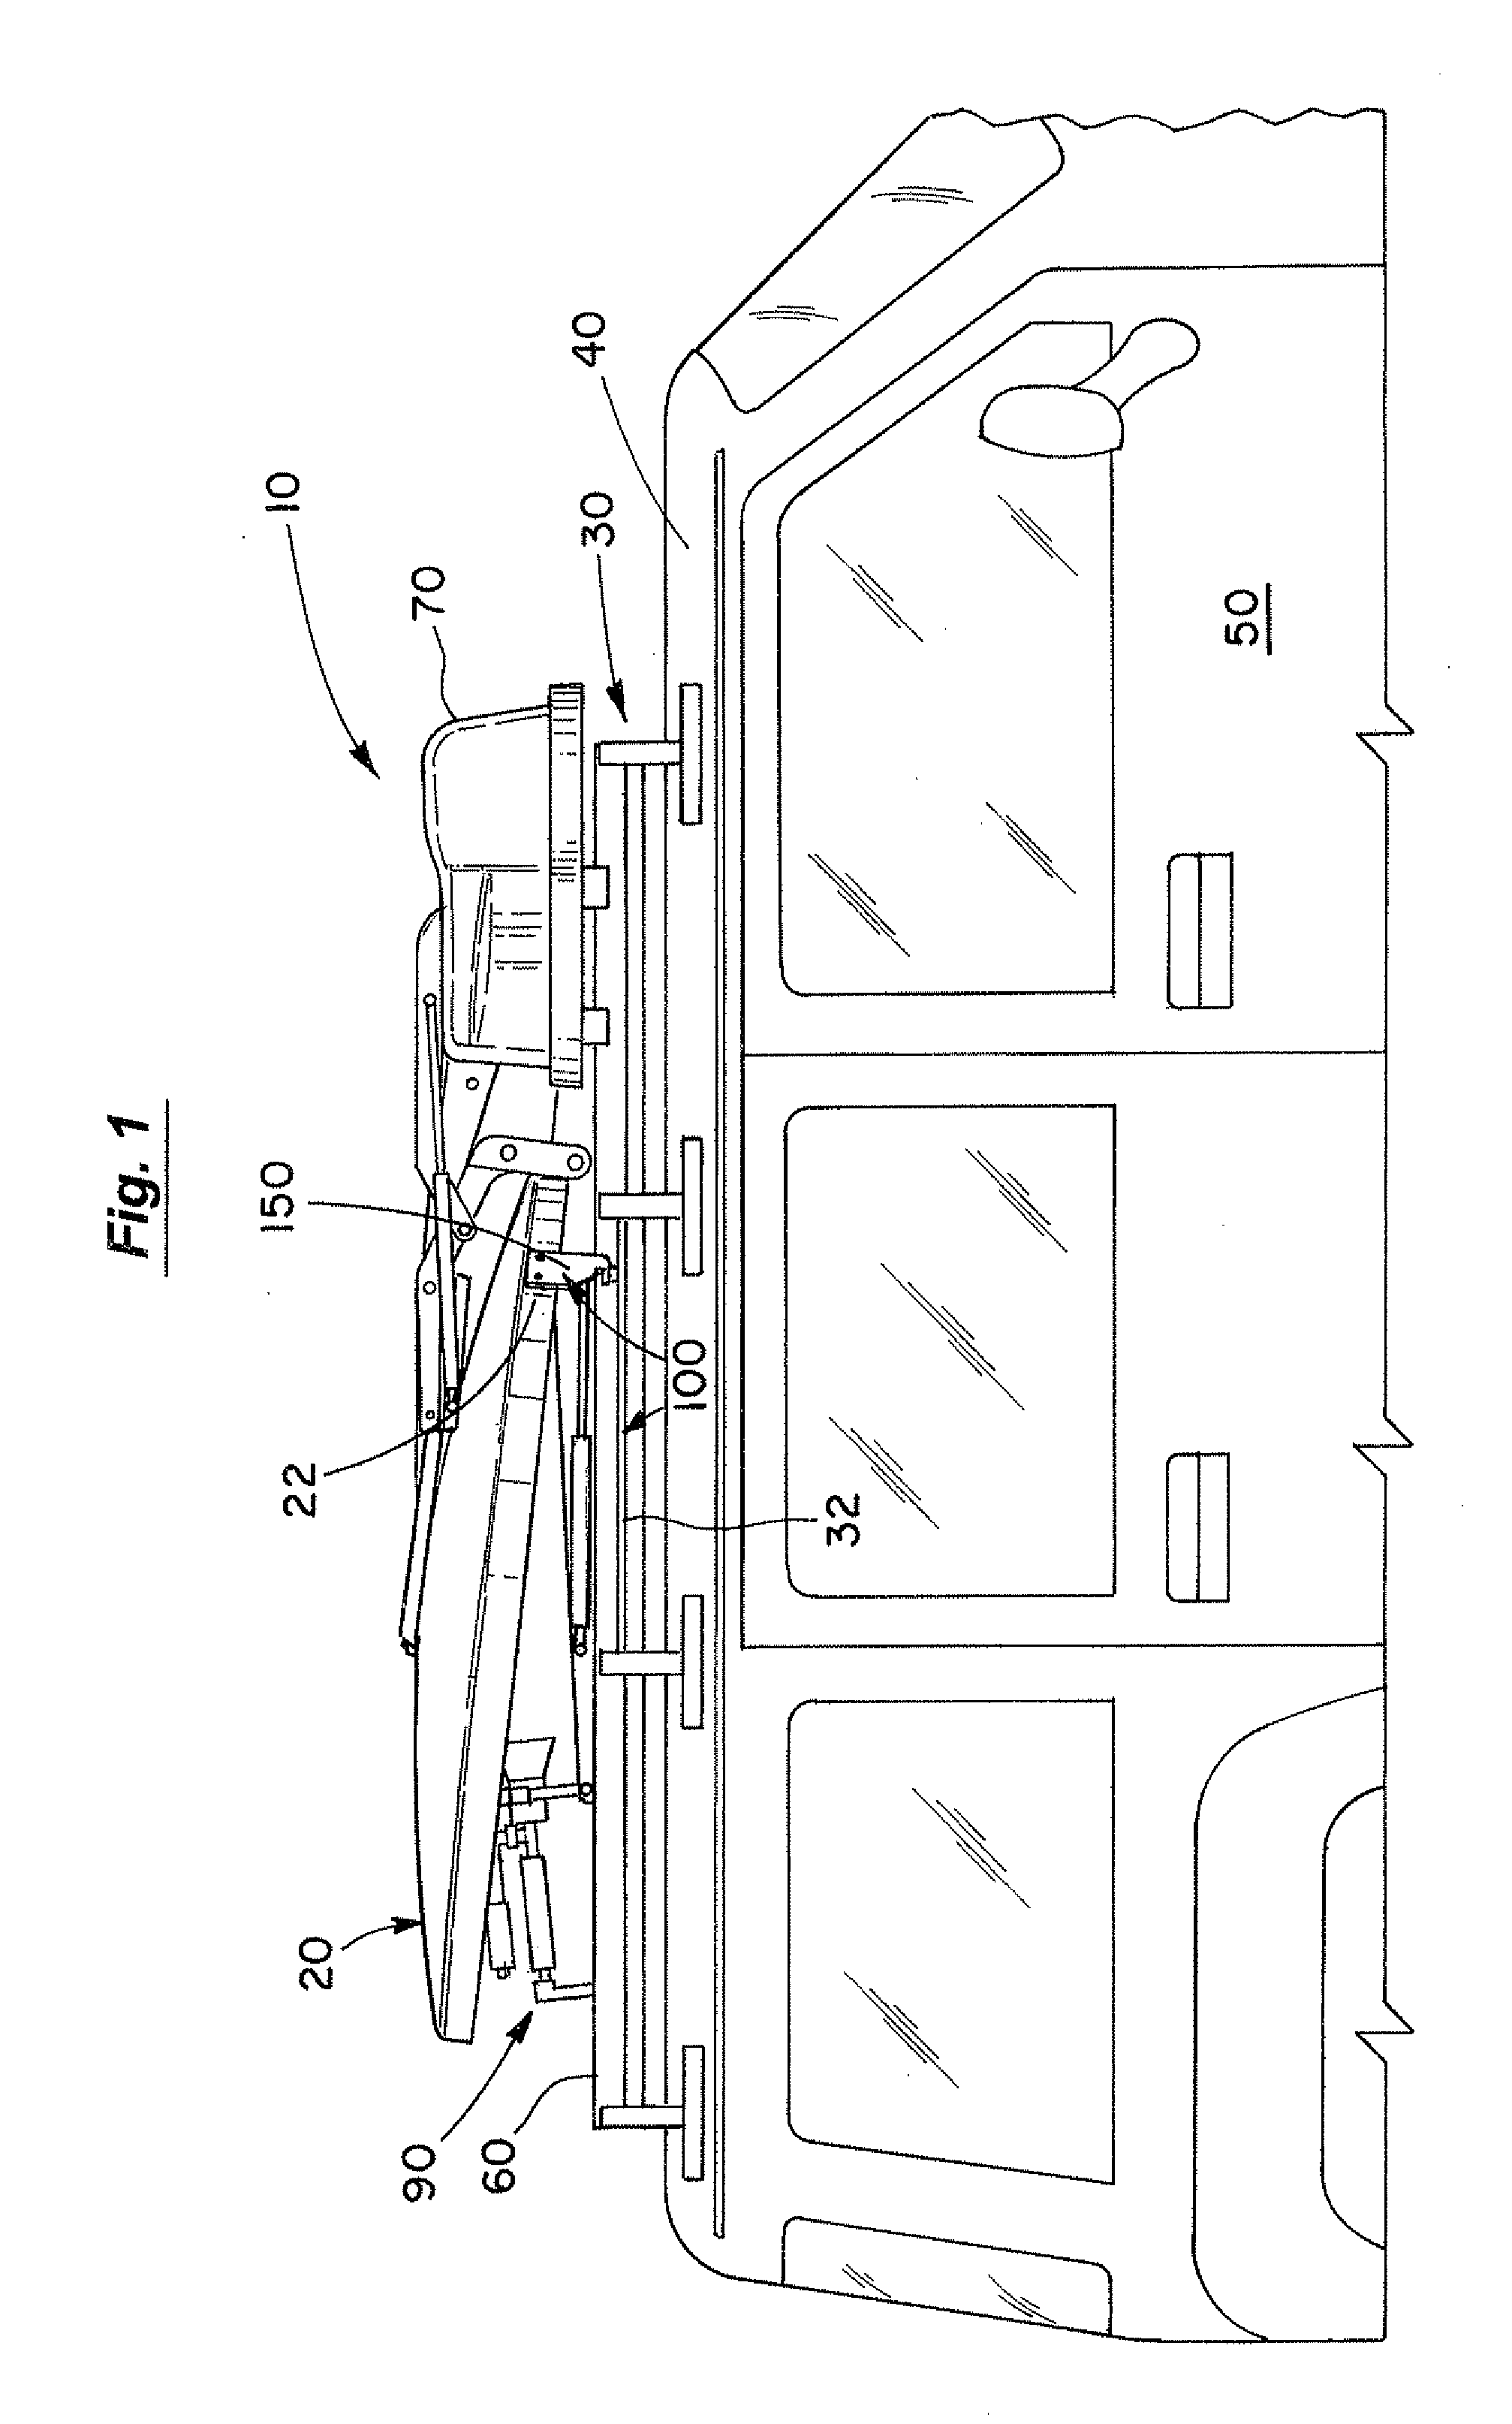 Stabilizing mechanism and method for a stowed mobile satellite reflector antenna